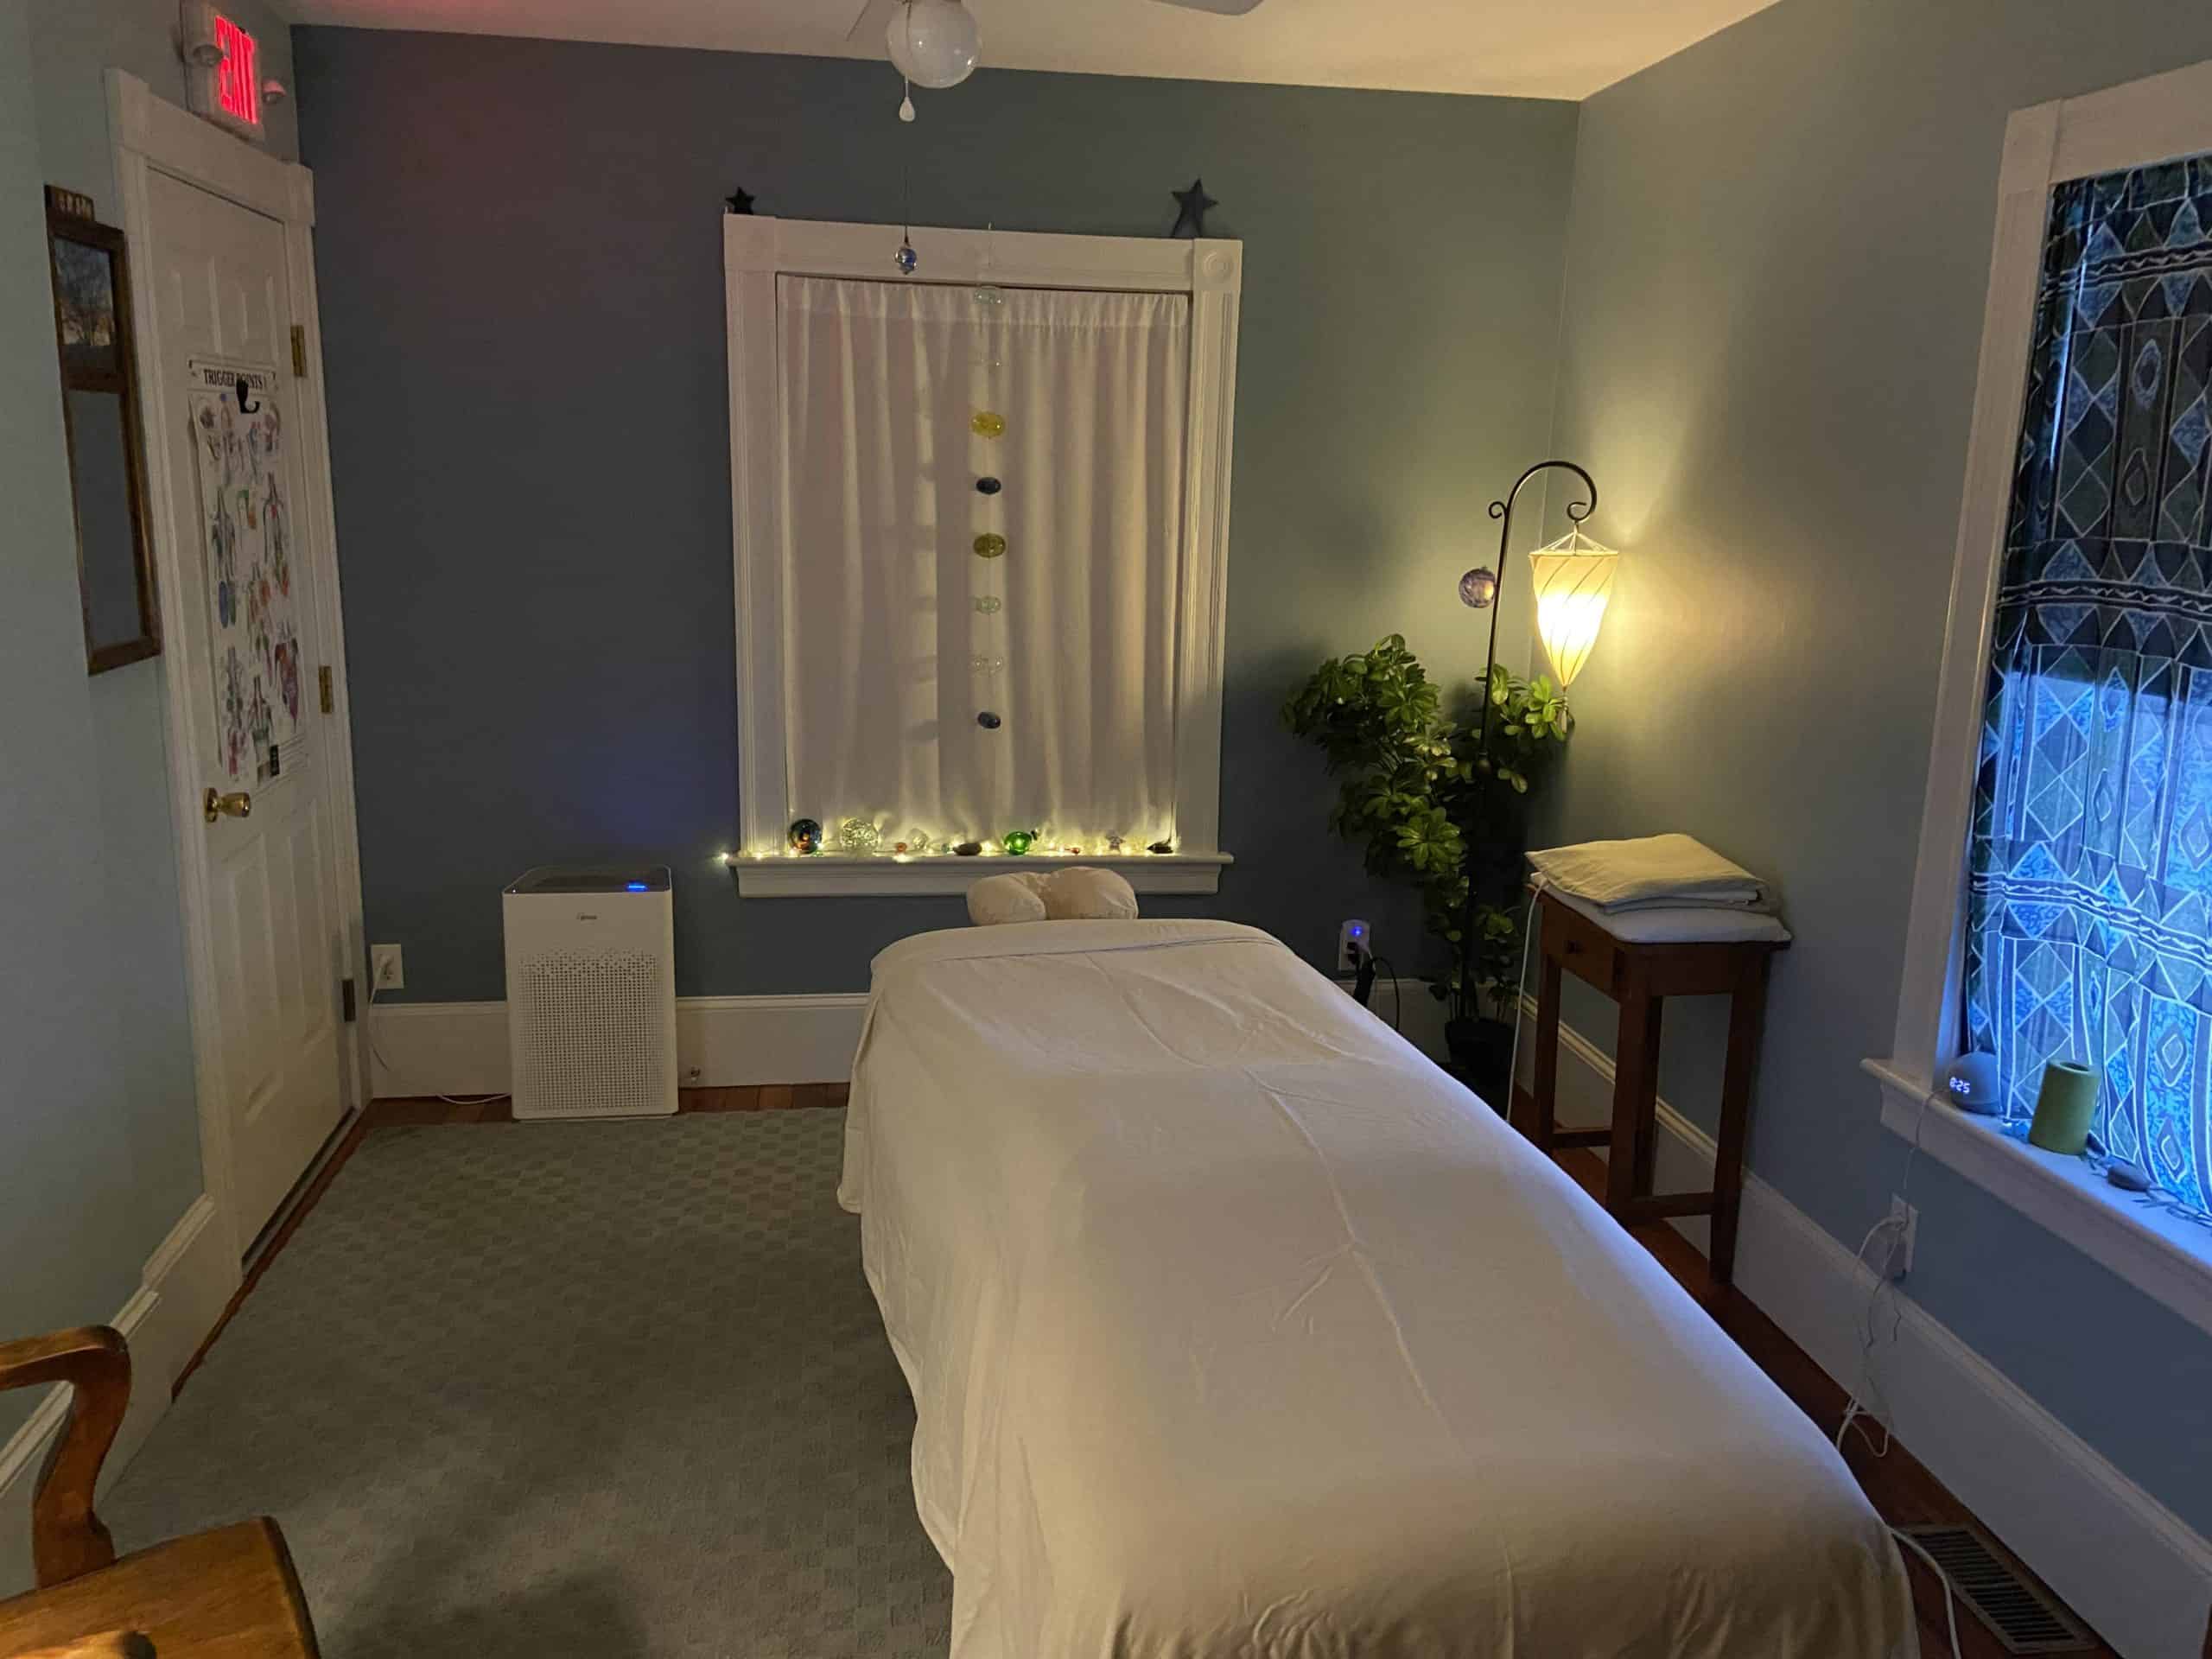 Healing Zone Massage treatment room with dim lighting for relaxation